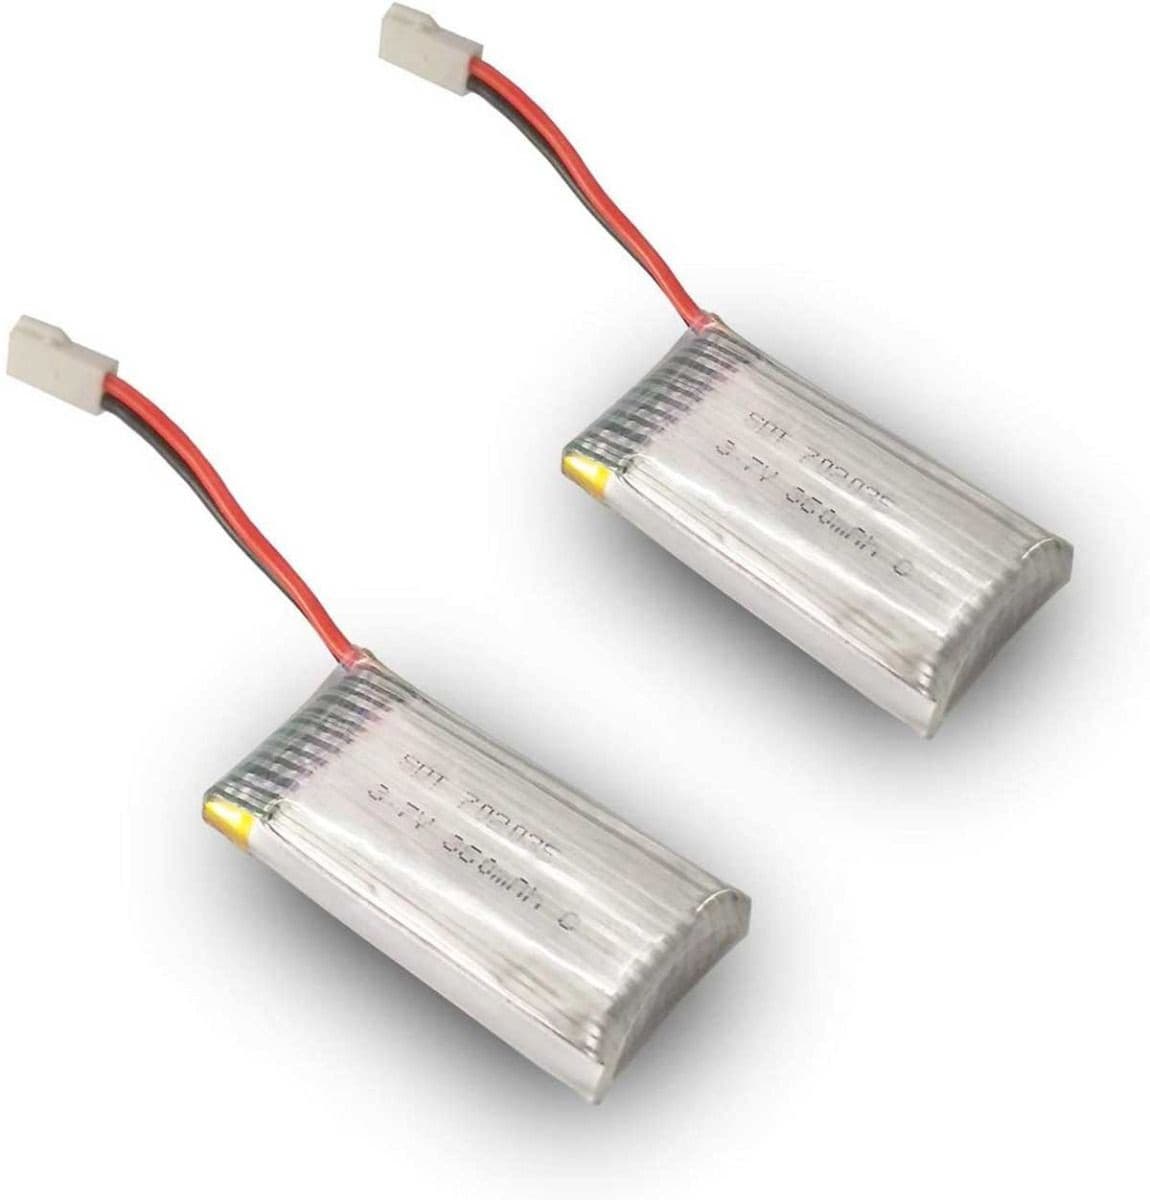 2pcs 3.7V 400mAh Lipo Rechargeable Battery for RC Airplane 761-2 to 15 (excluding 761-6) - EXHOBBY